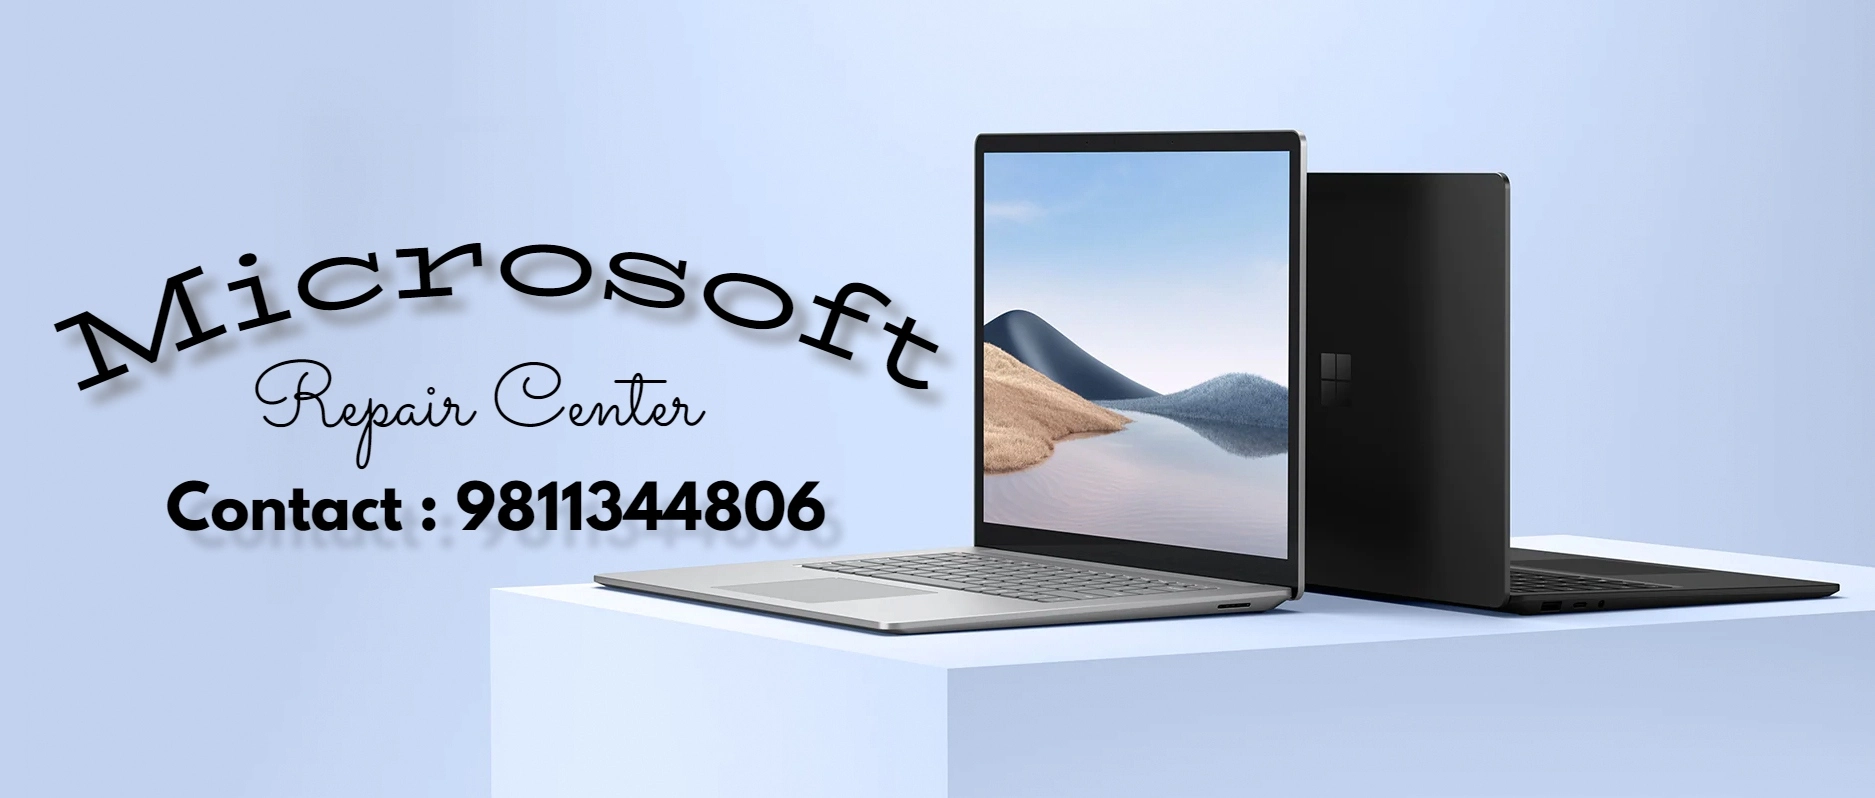 Microsoft Surface Service Centers in Gurgaon